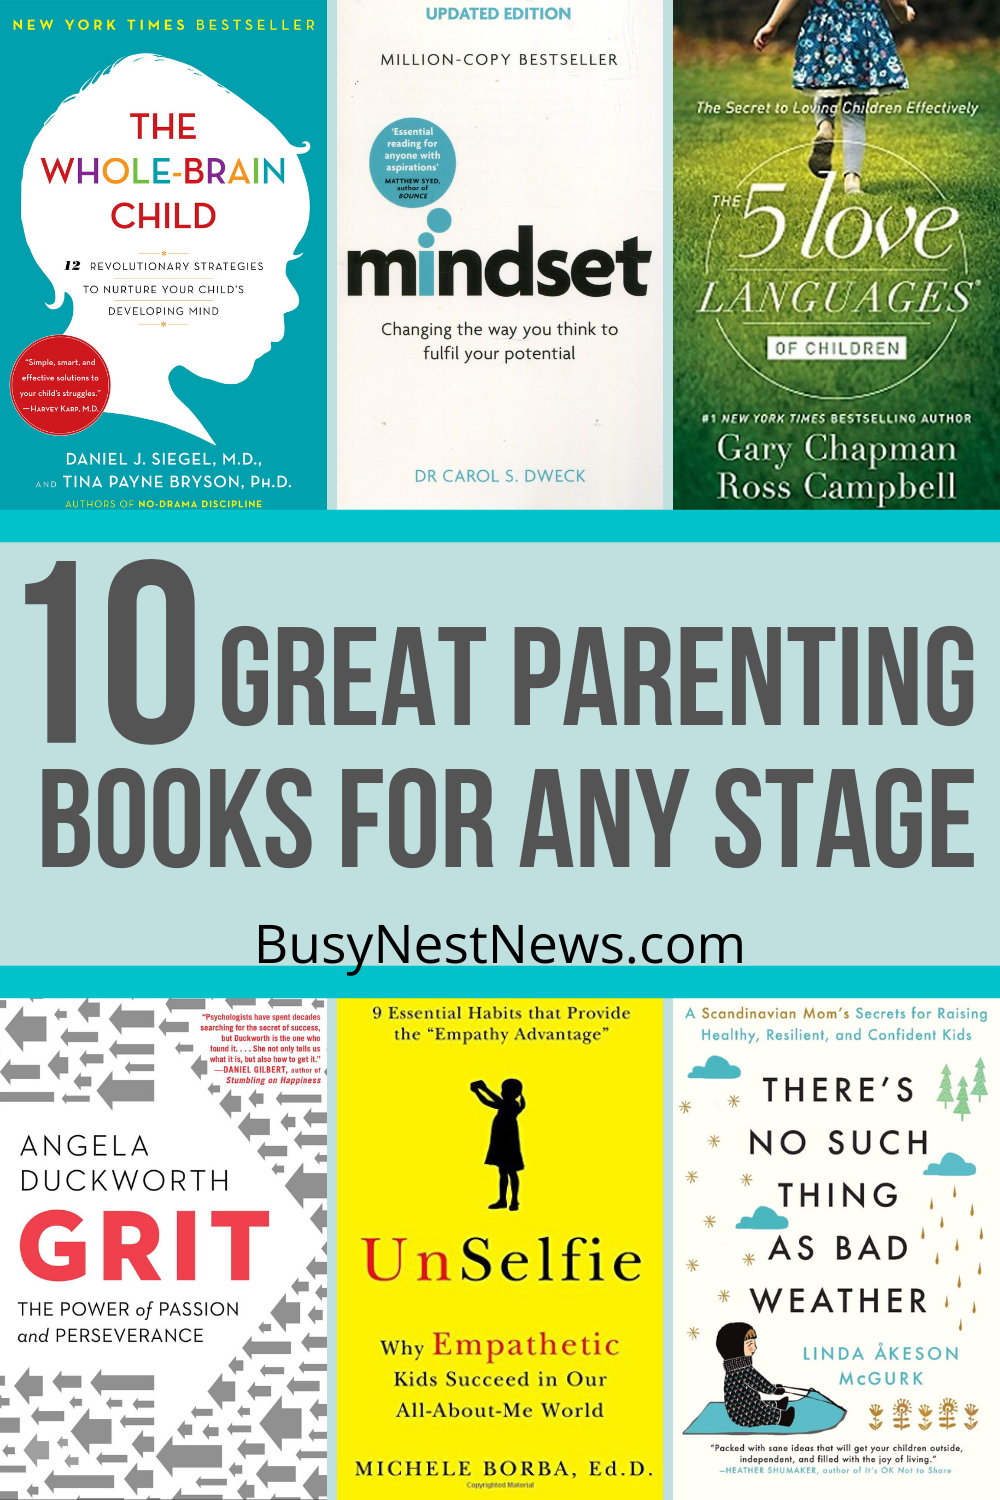 A printable list of 10 excellent parenting books for all stages